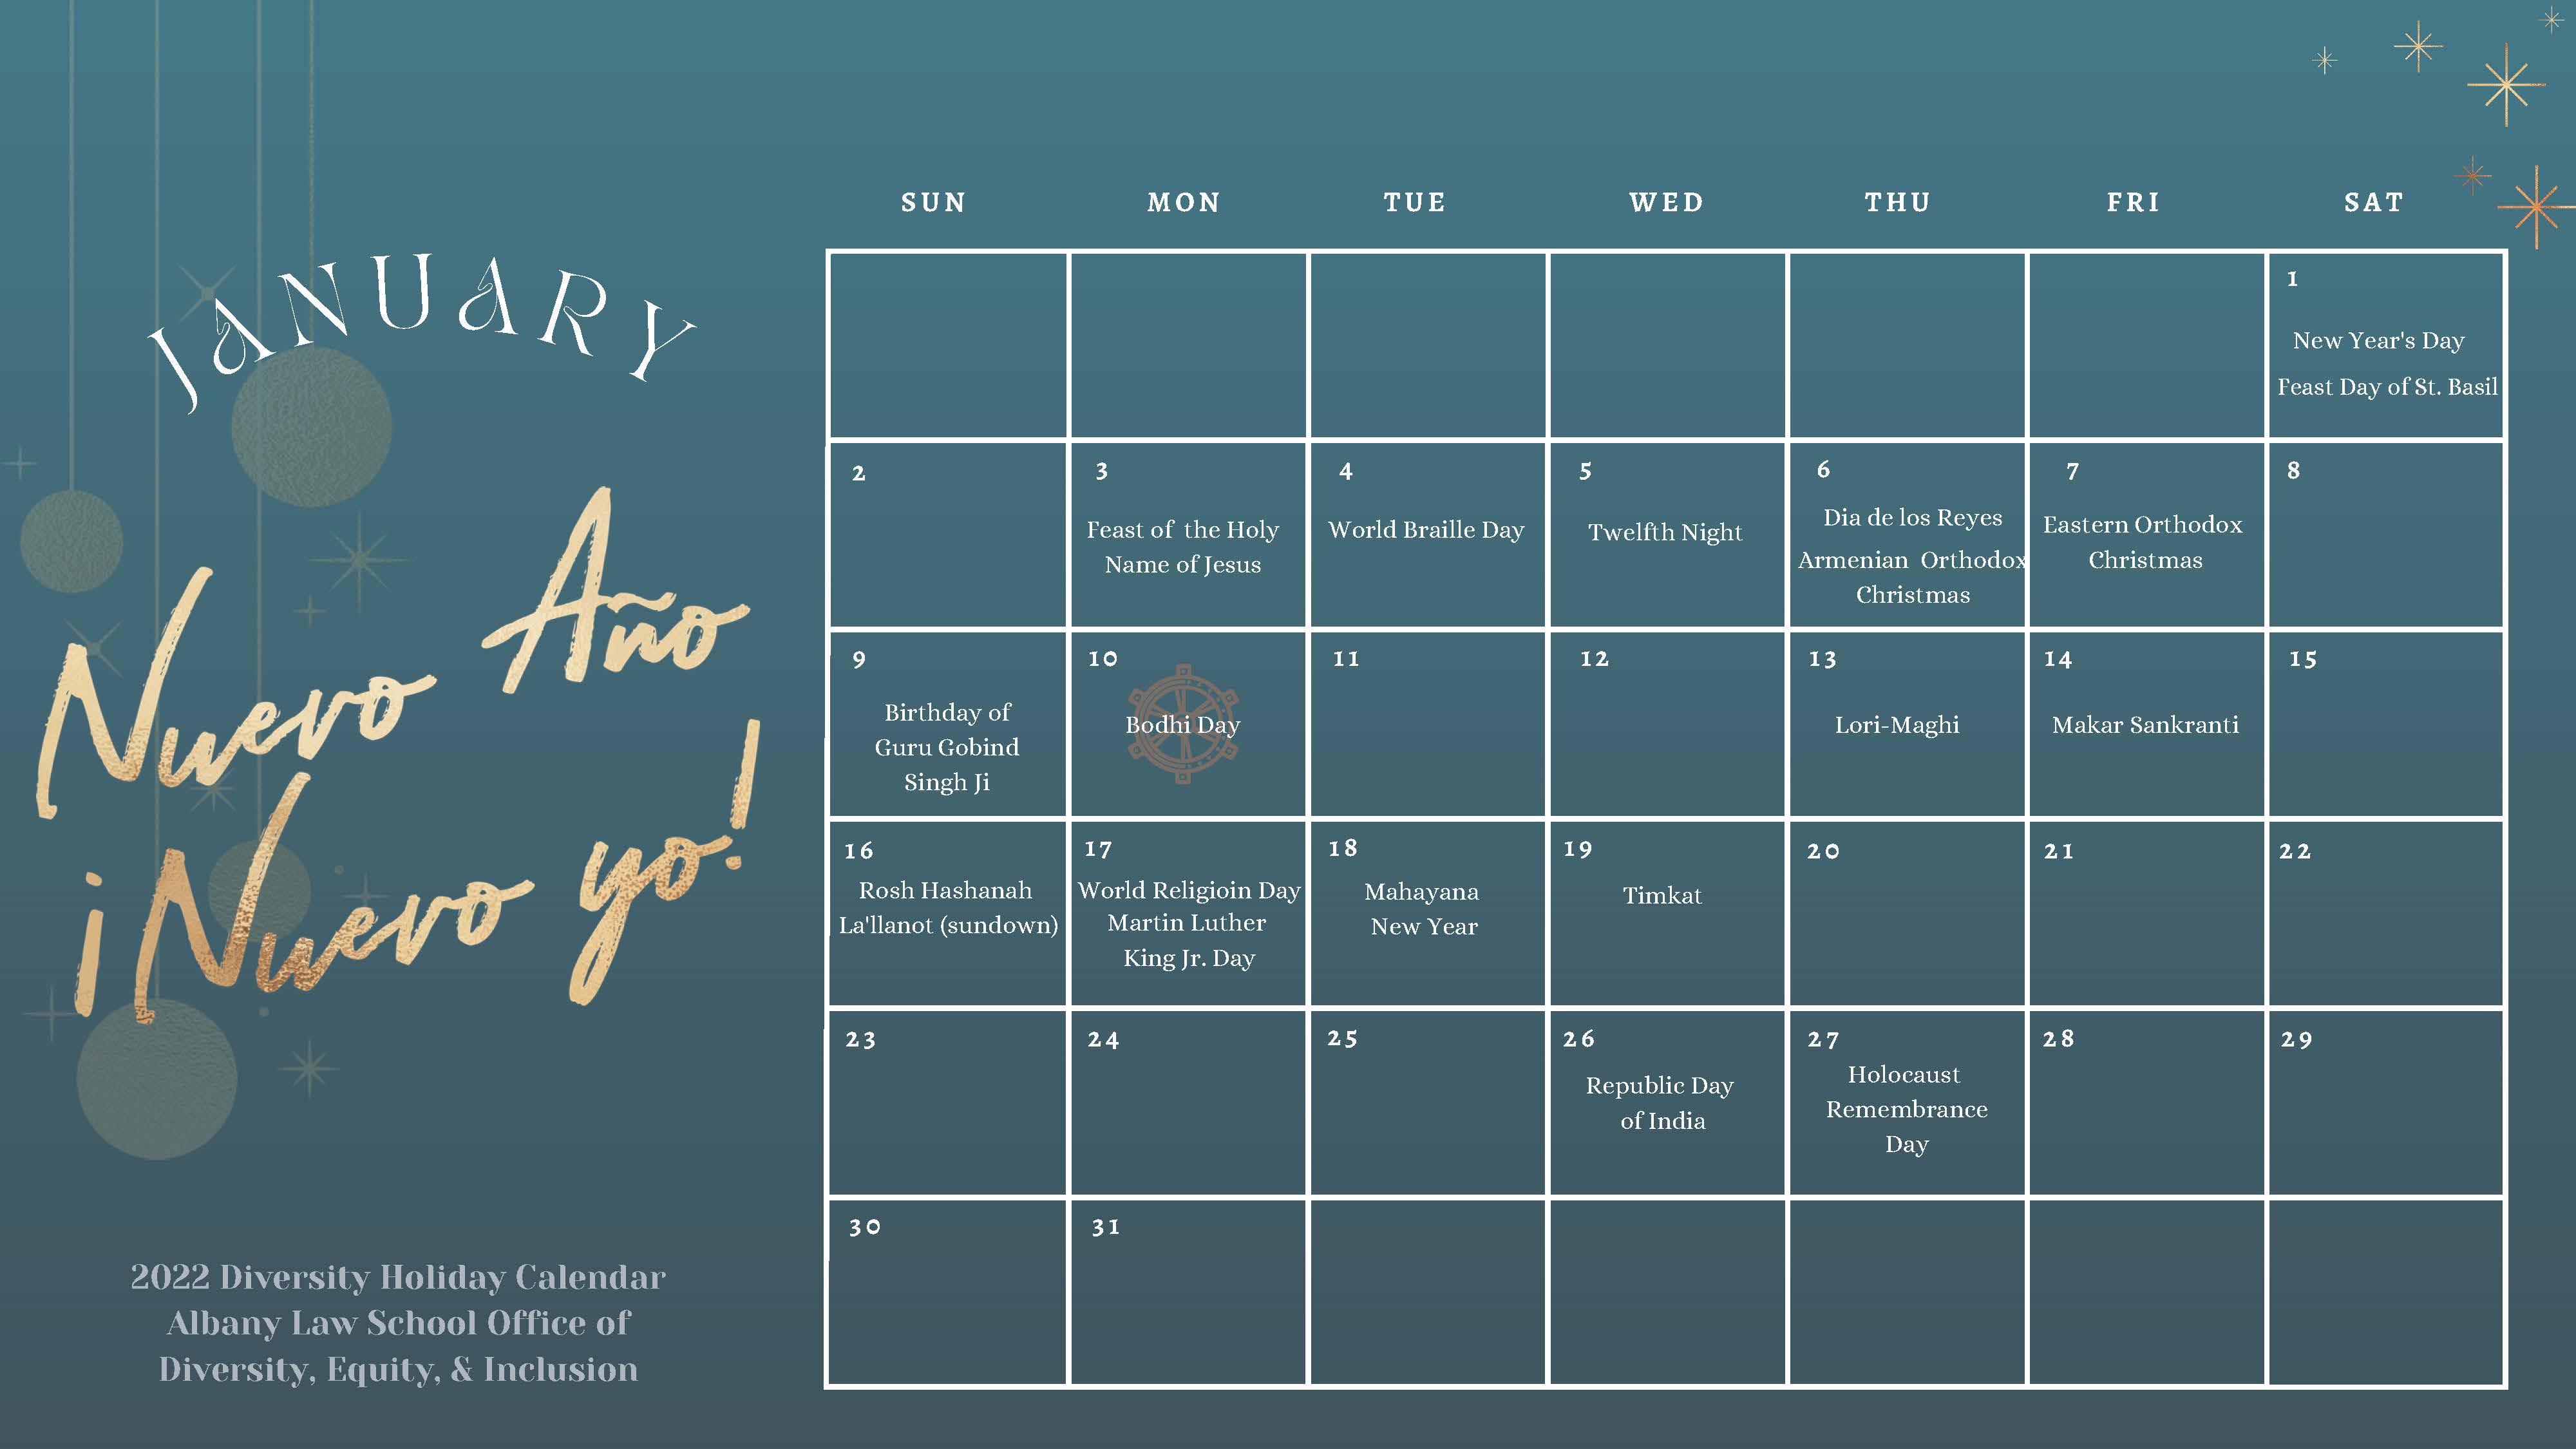 Diversity, Equity, and Inclusion Holiday Calendar